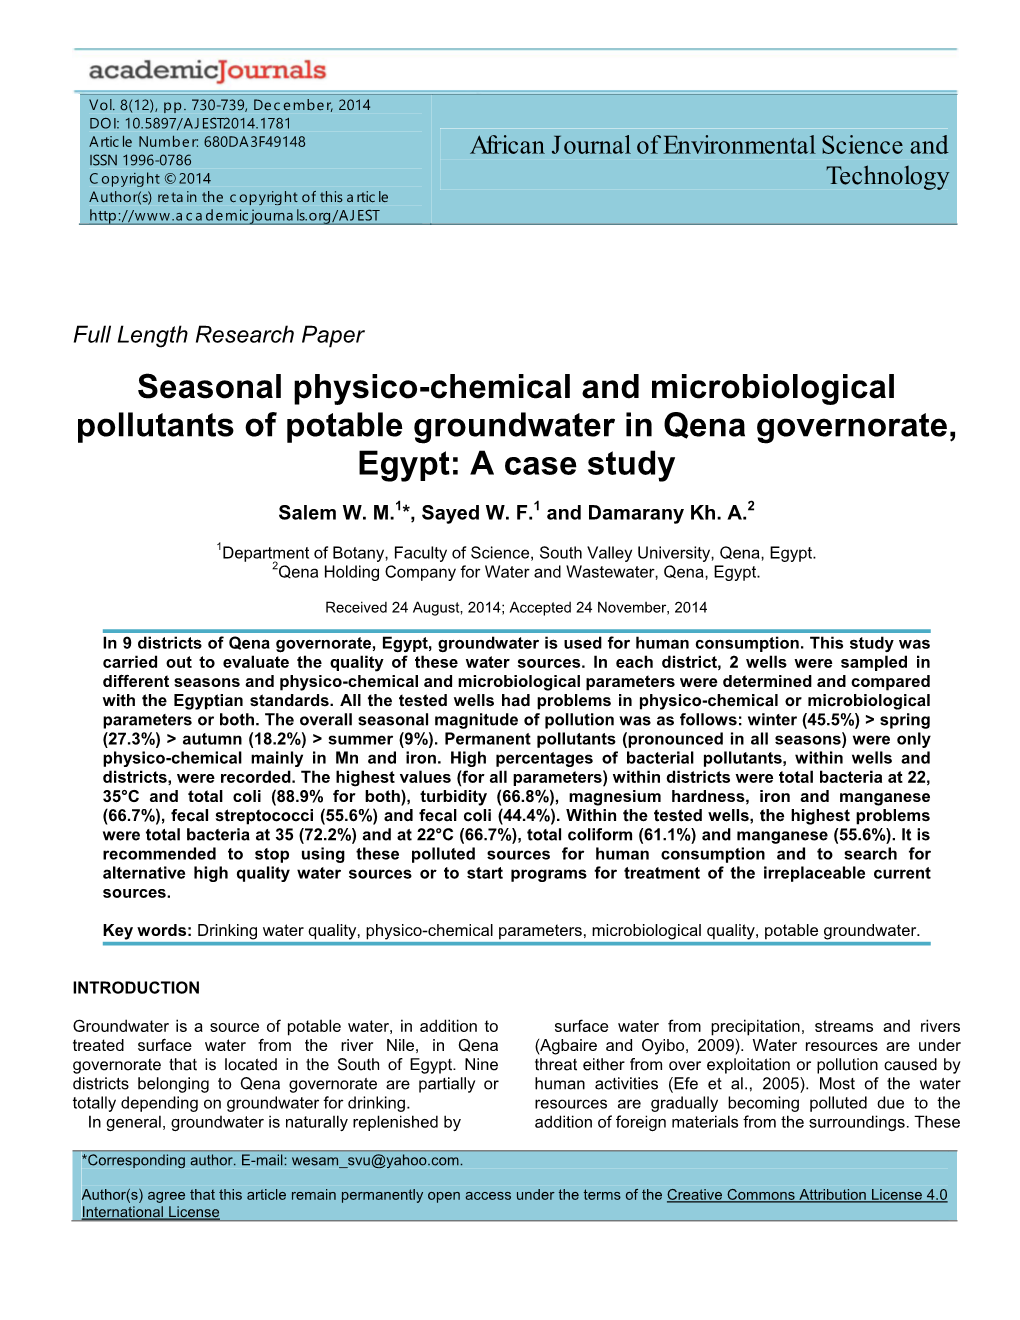 Seasonal Physico-Chemical and Microbiological Pollutants of Potable Groundwater in Qena Governorate, Egypt: a Case Study